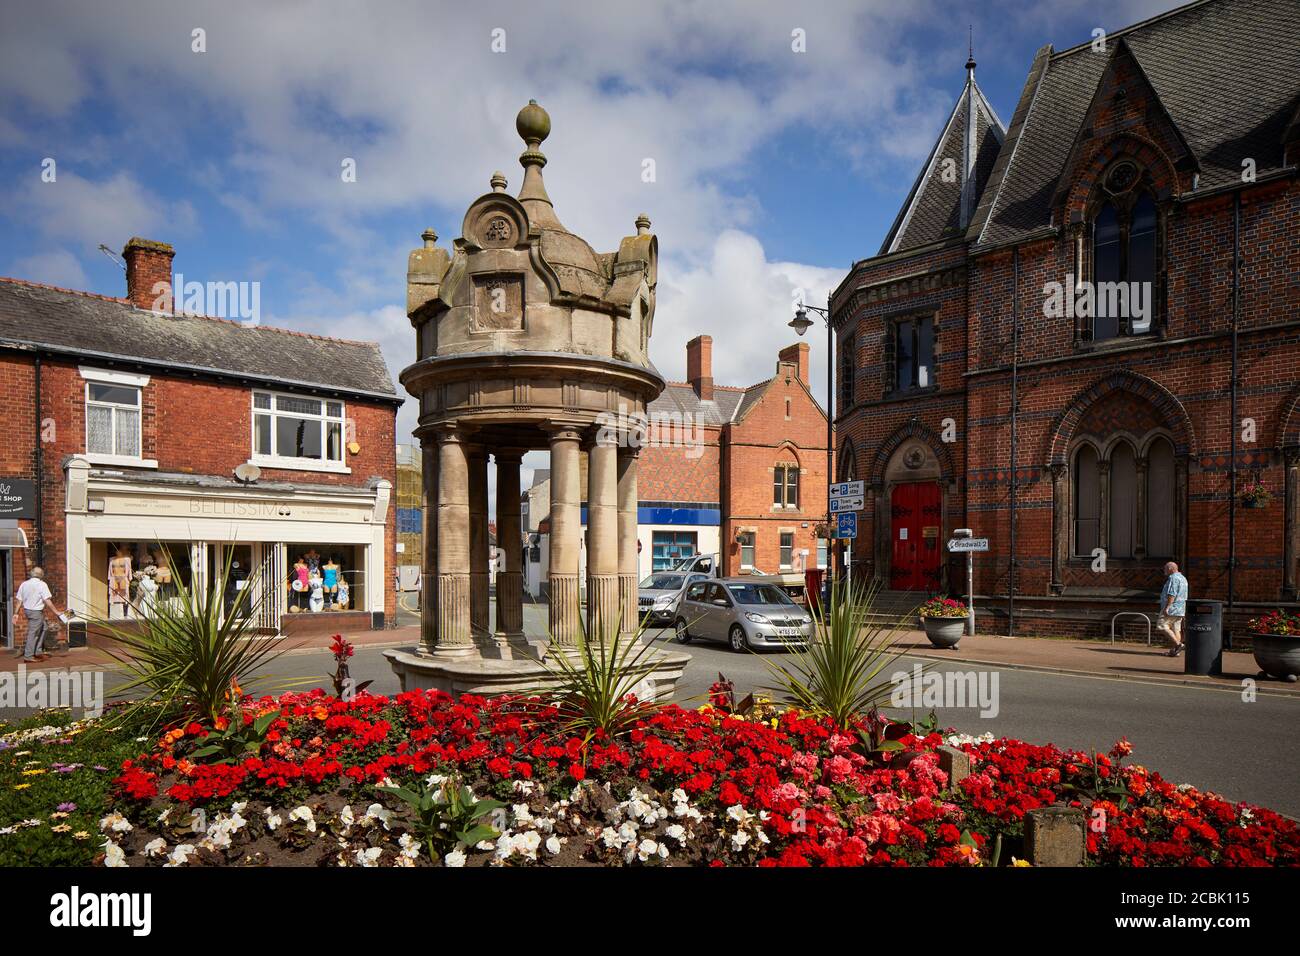 Sandbach market town in Cheshire Hightown Drinking Fountain on a roundabout Stock Photo